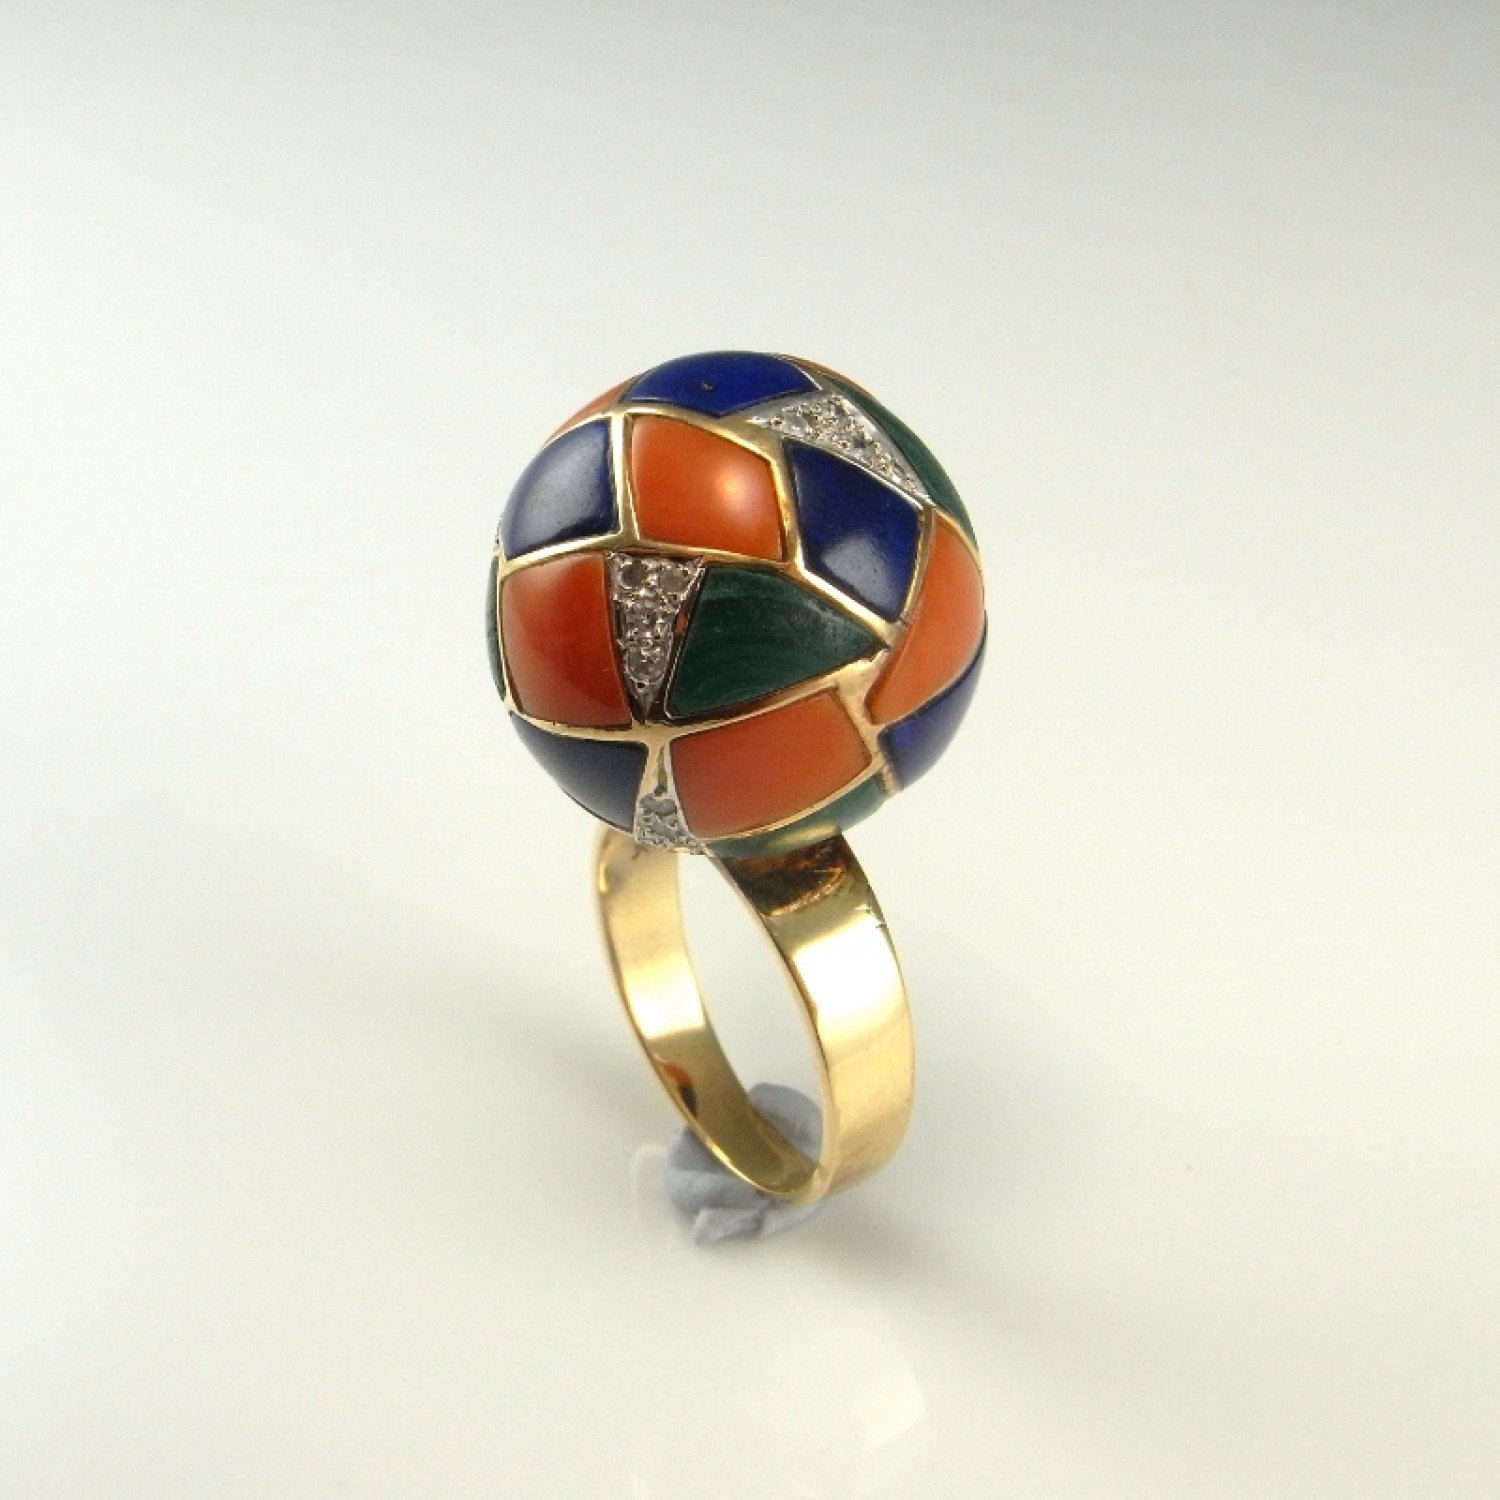 Inlay 14K Gold Ring Inlaid 14K Ring Vintage Lapis Malachite Red Coral Ring Mid Century Modernist Ring Cockail Ring Unique Diamond Ring Fine